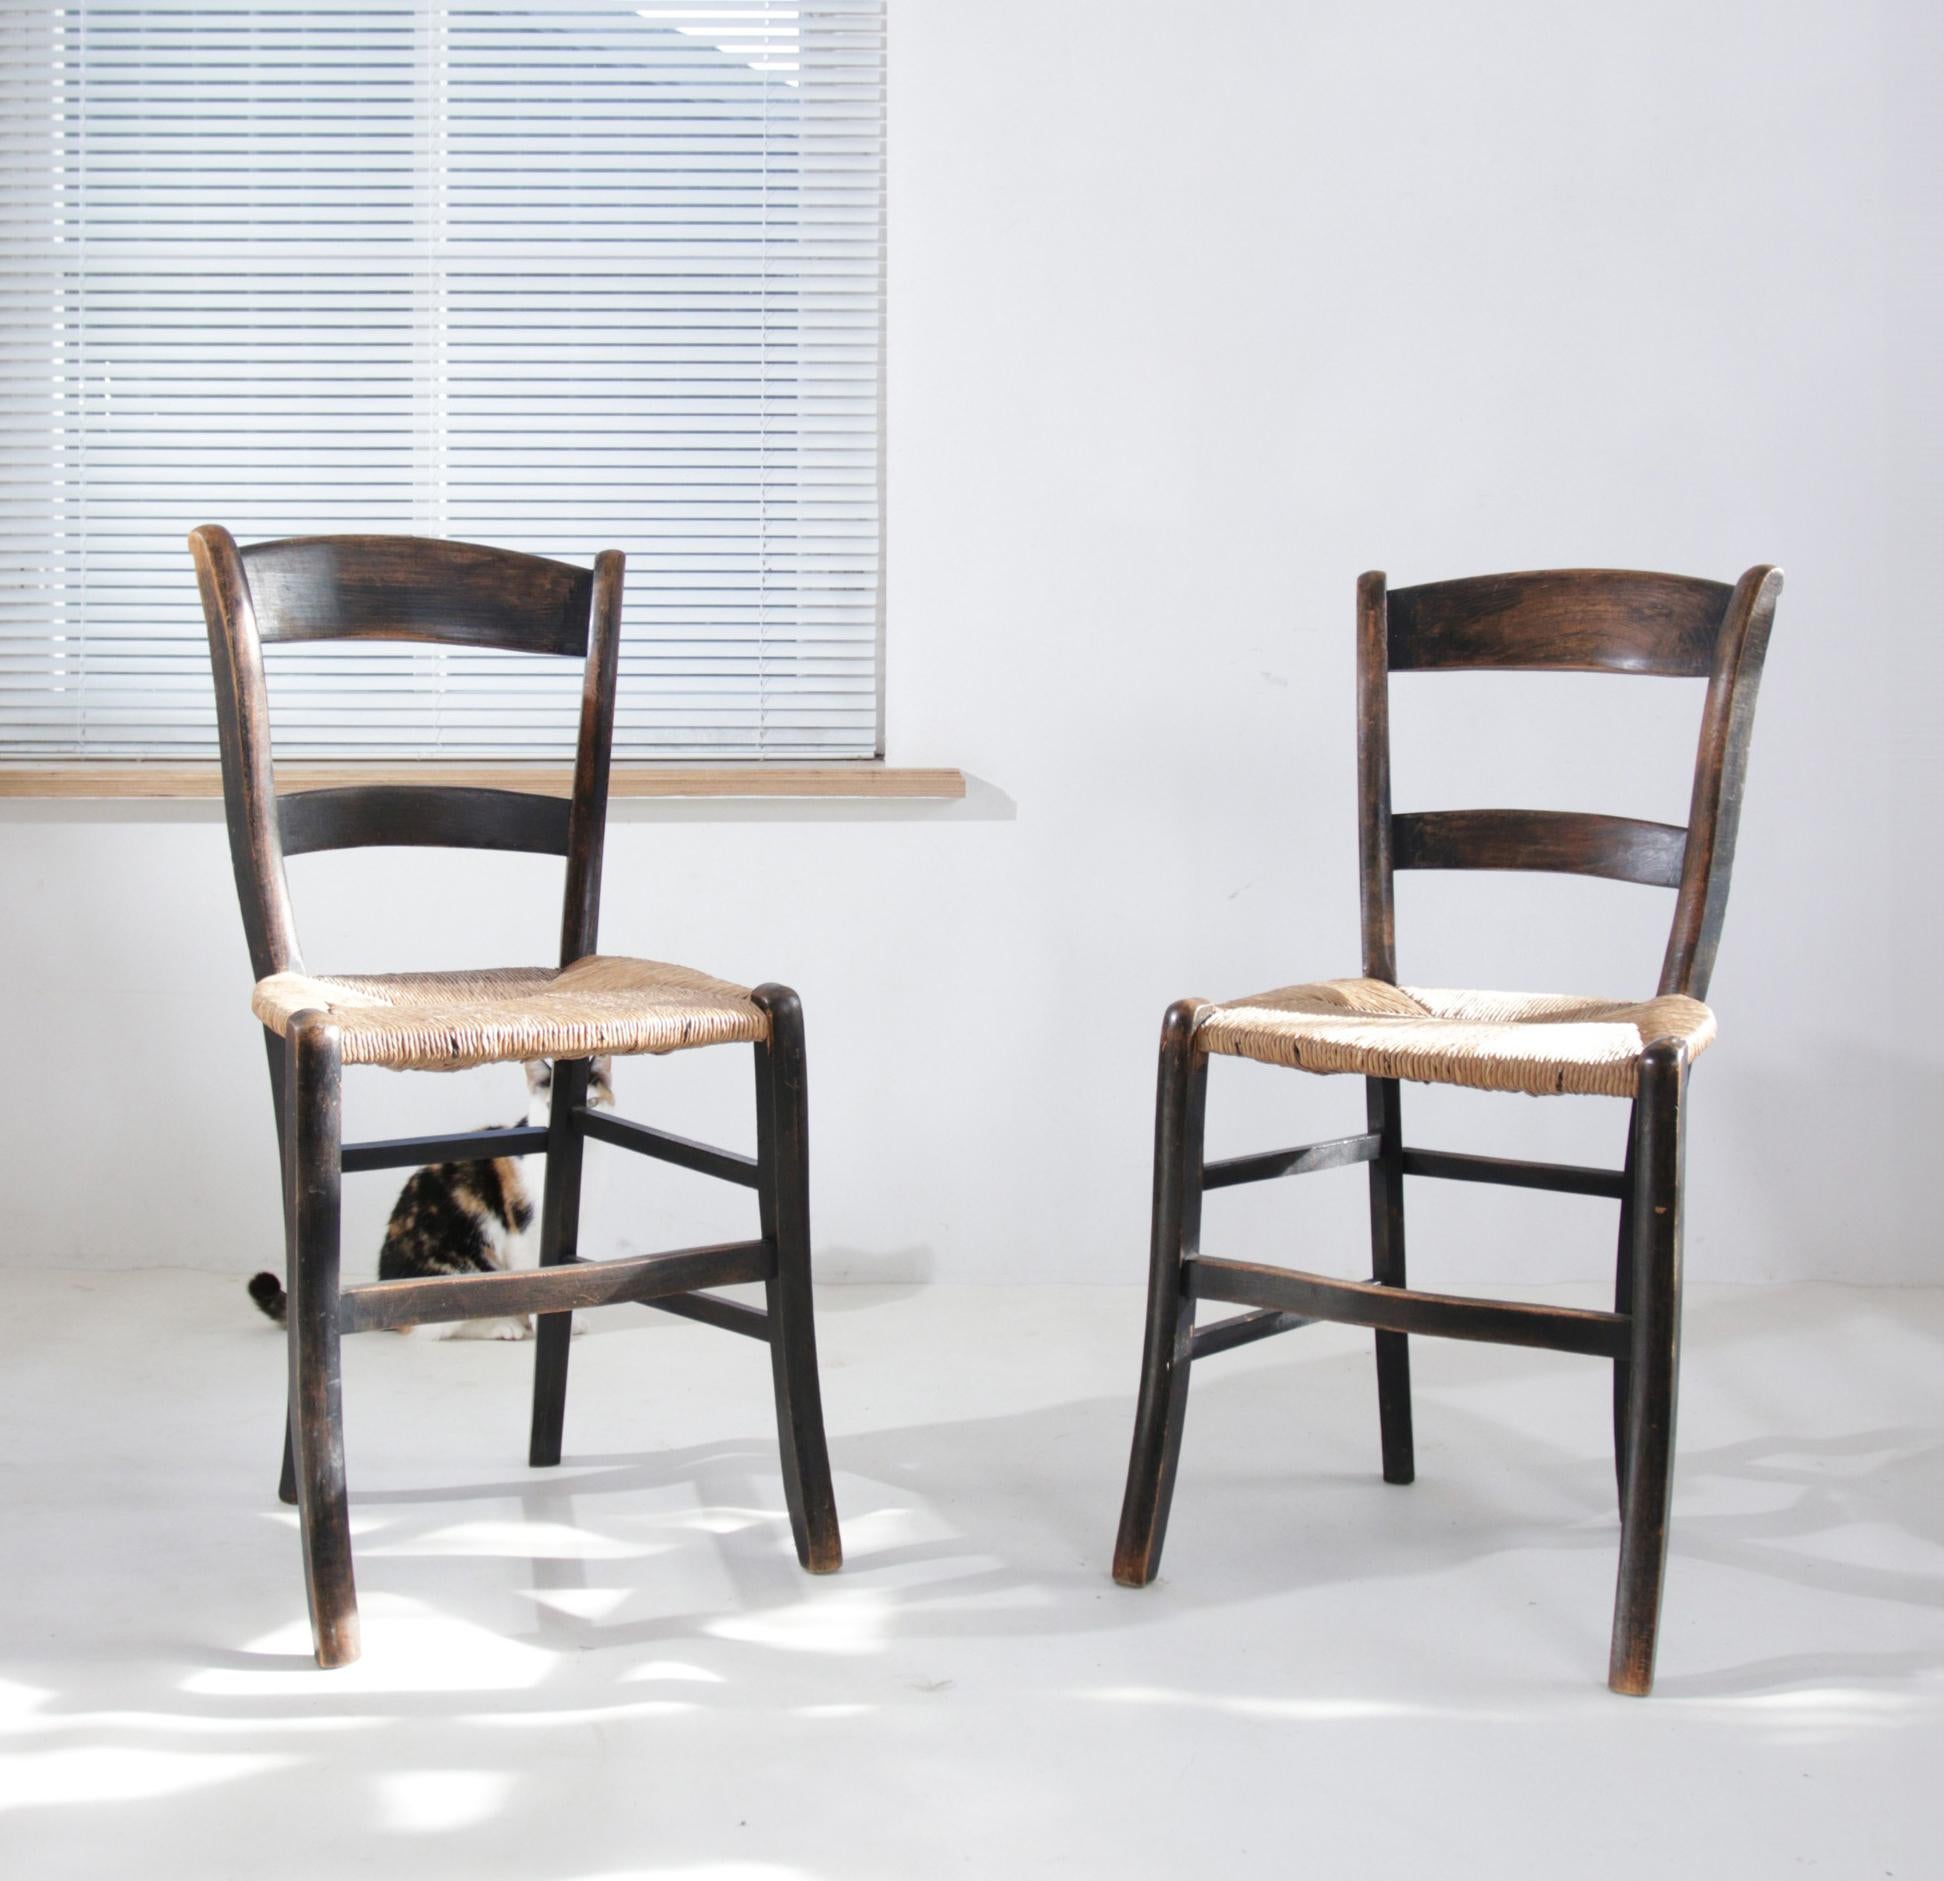 These elegant wooden chairs, presumably dating from the early to mid-20th century, are emblematic of the craftsmanship of the era. The wooden frame, dark in color and graceful in its simplicity, merges functionality with a subtle aesthetic. The